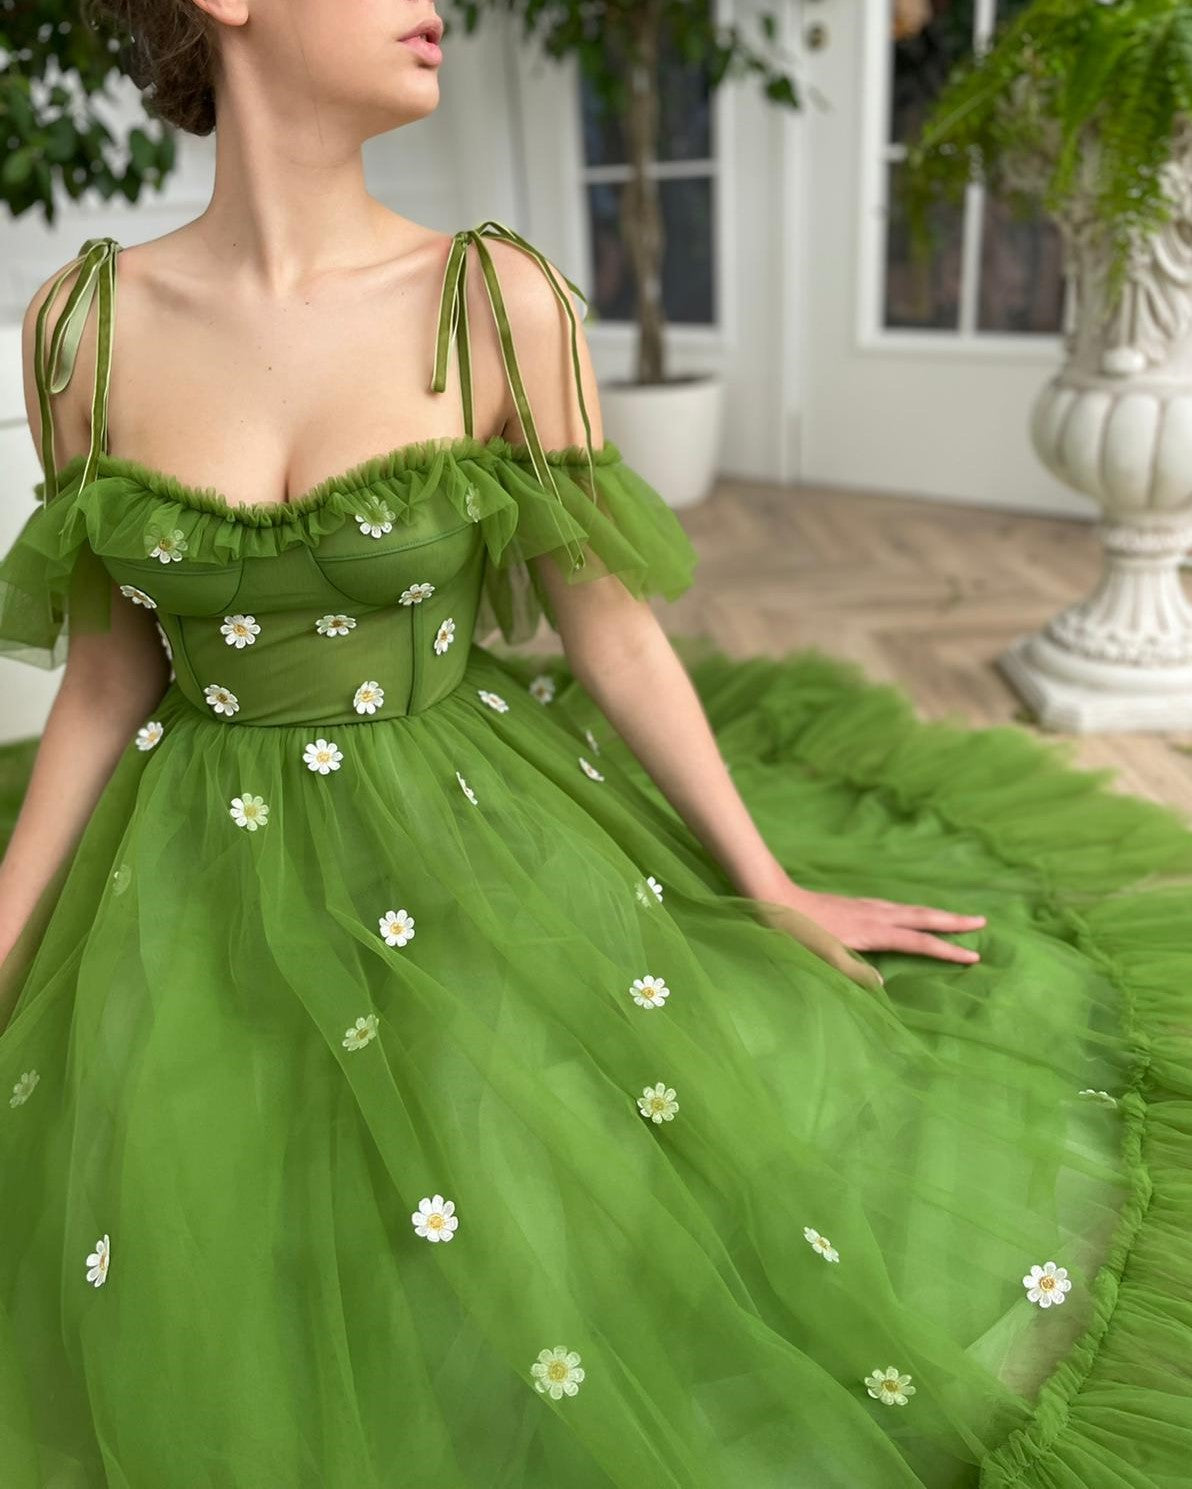 Green midi dress with spaghetti straps, off the shoulder sleeves and embroidered daisies